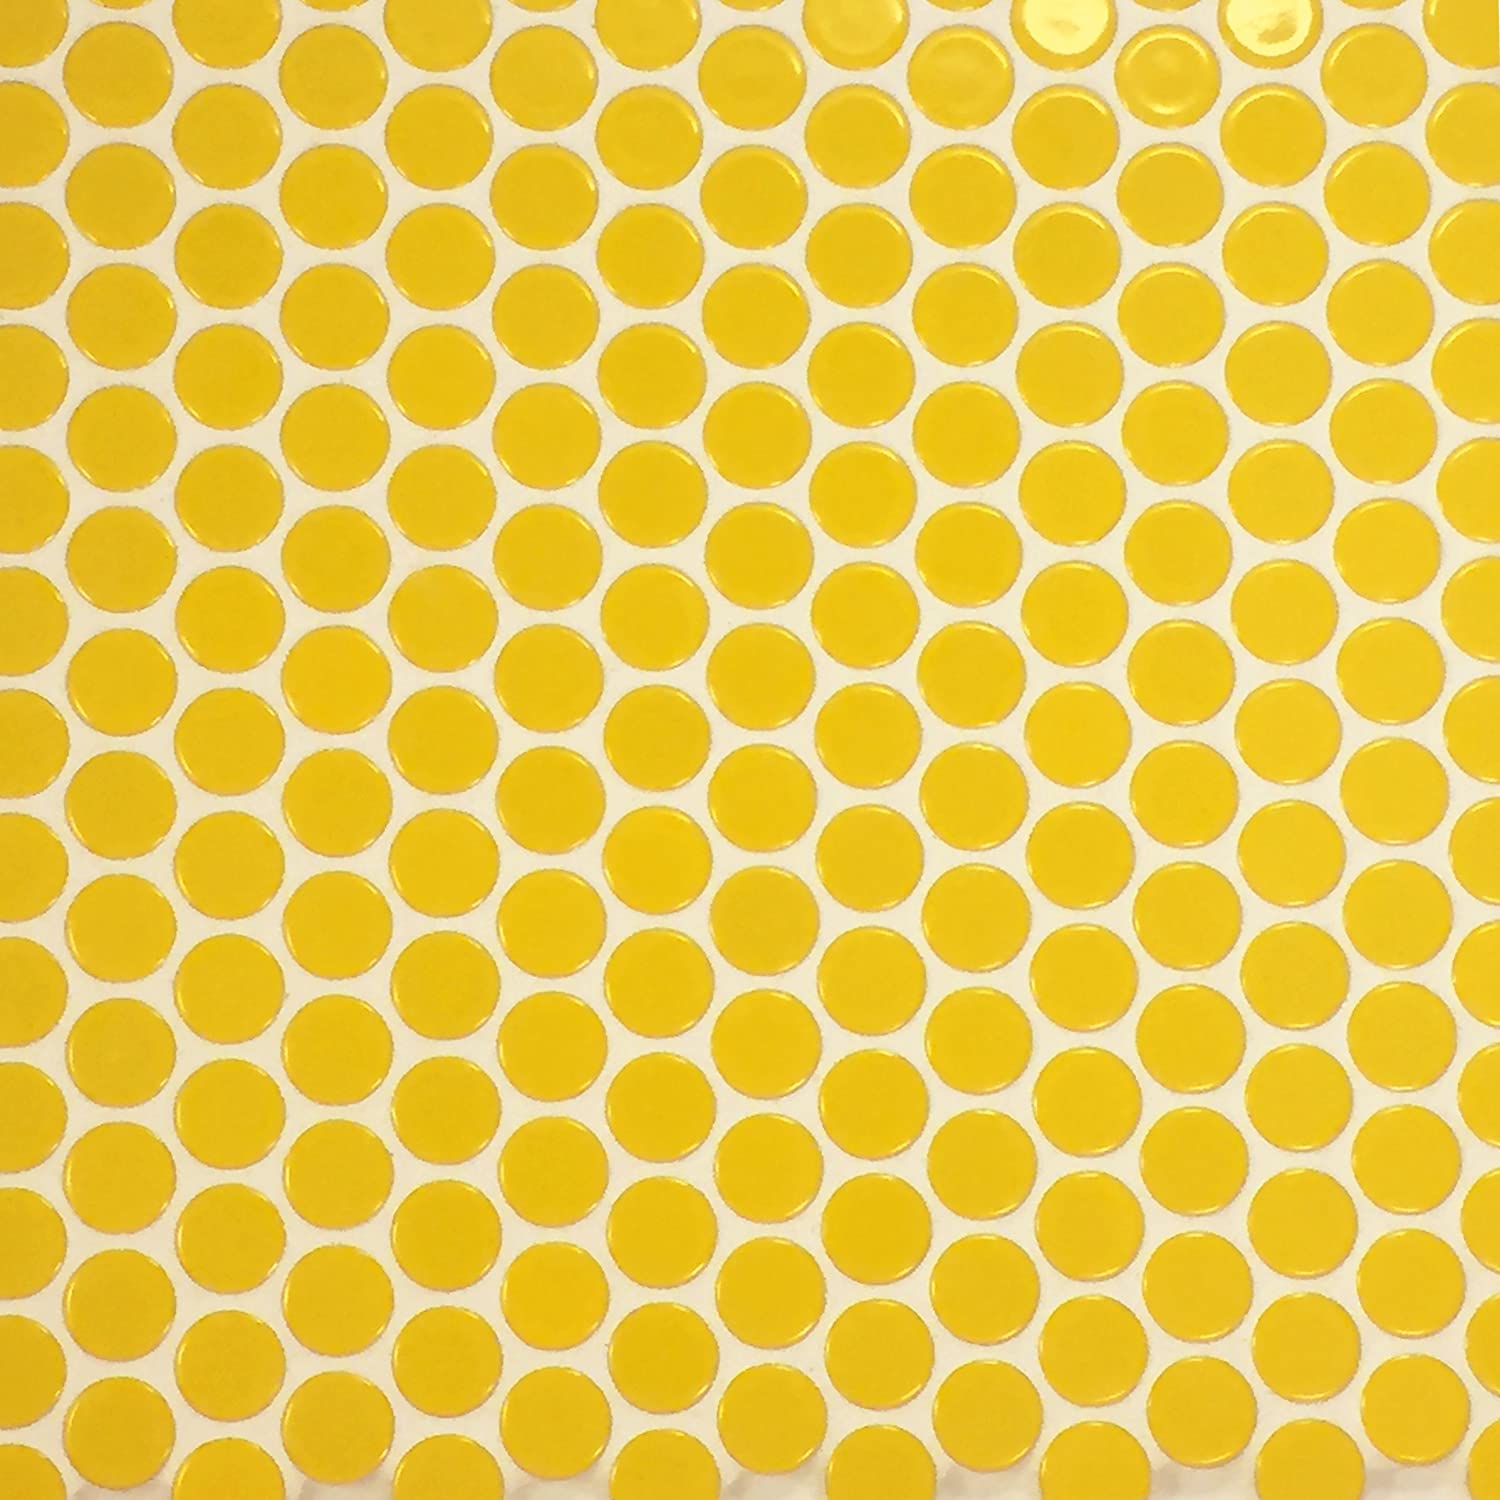 Yellow Penny Round Porcelain Mosaic Floor Wall Tile Backsplash for Bathroom Shower, Kitchen, Accent Décor, Fireplace,  on 12x12 Mesh for Easy Installation